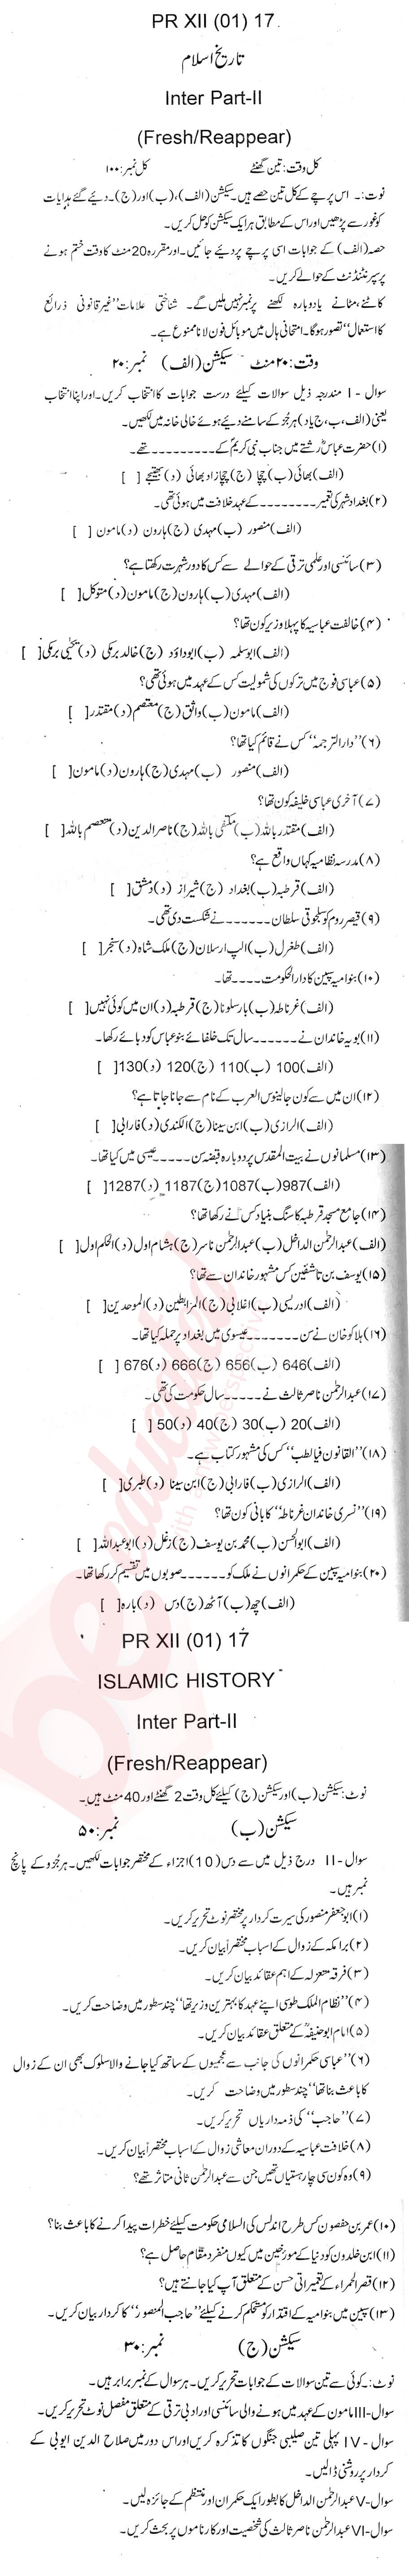 Islamic History FA Part 2 Past Paper Group 1 BISE Abbottabad 2017